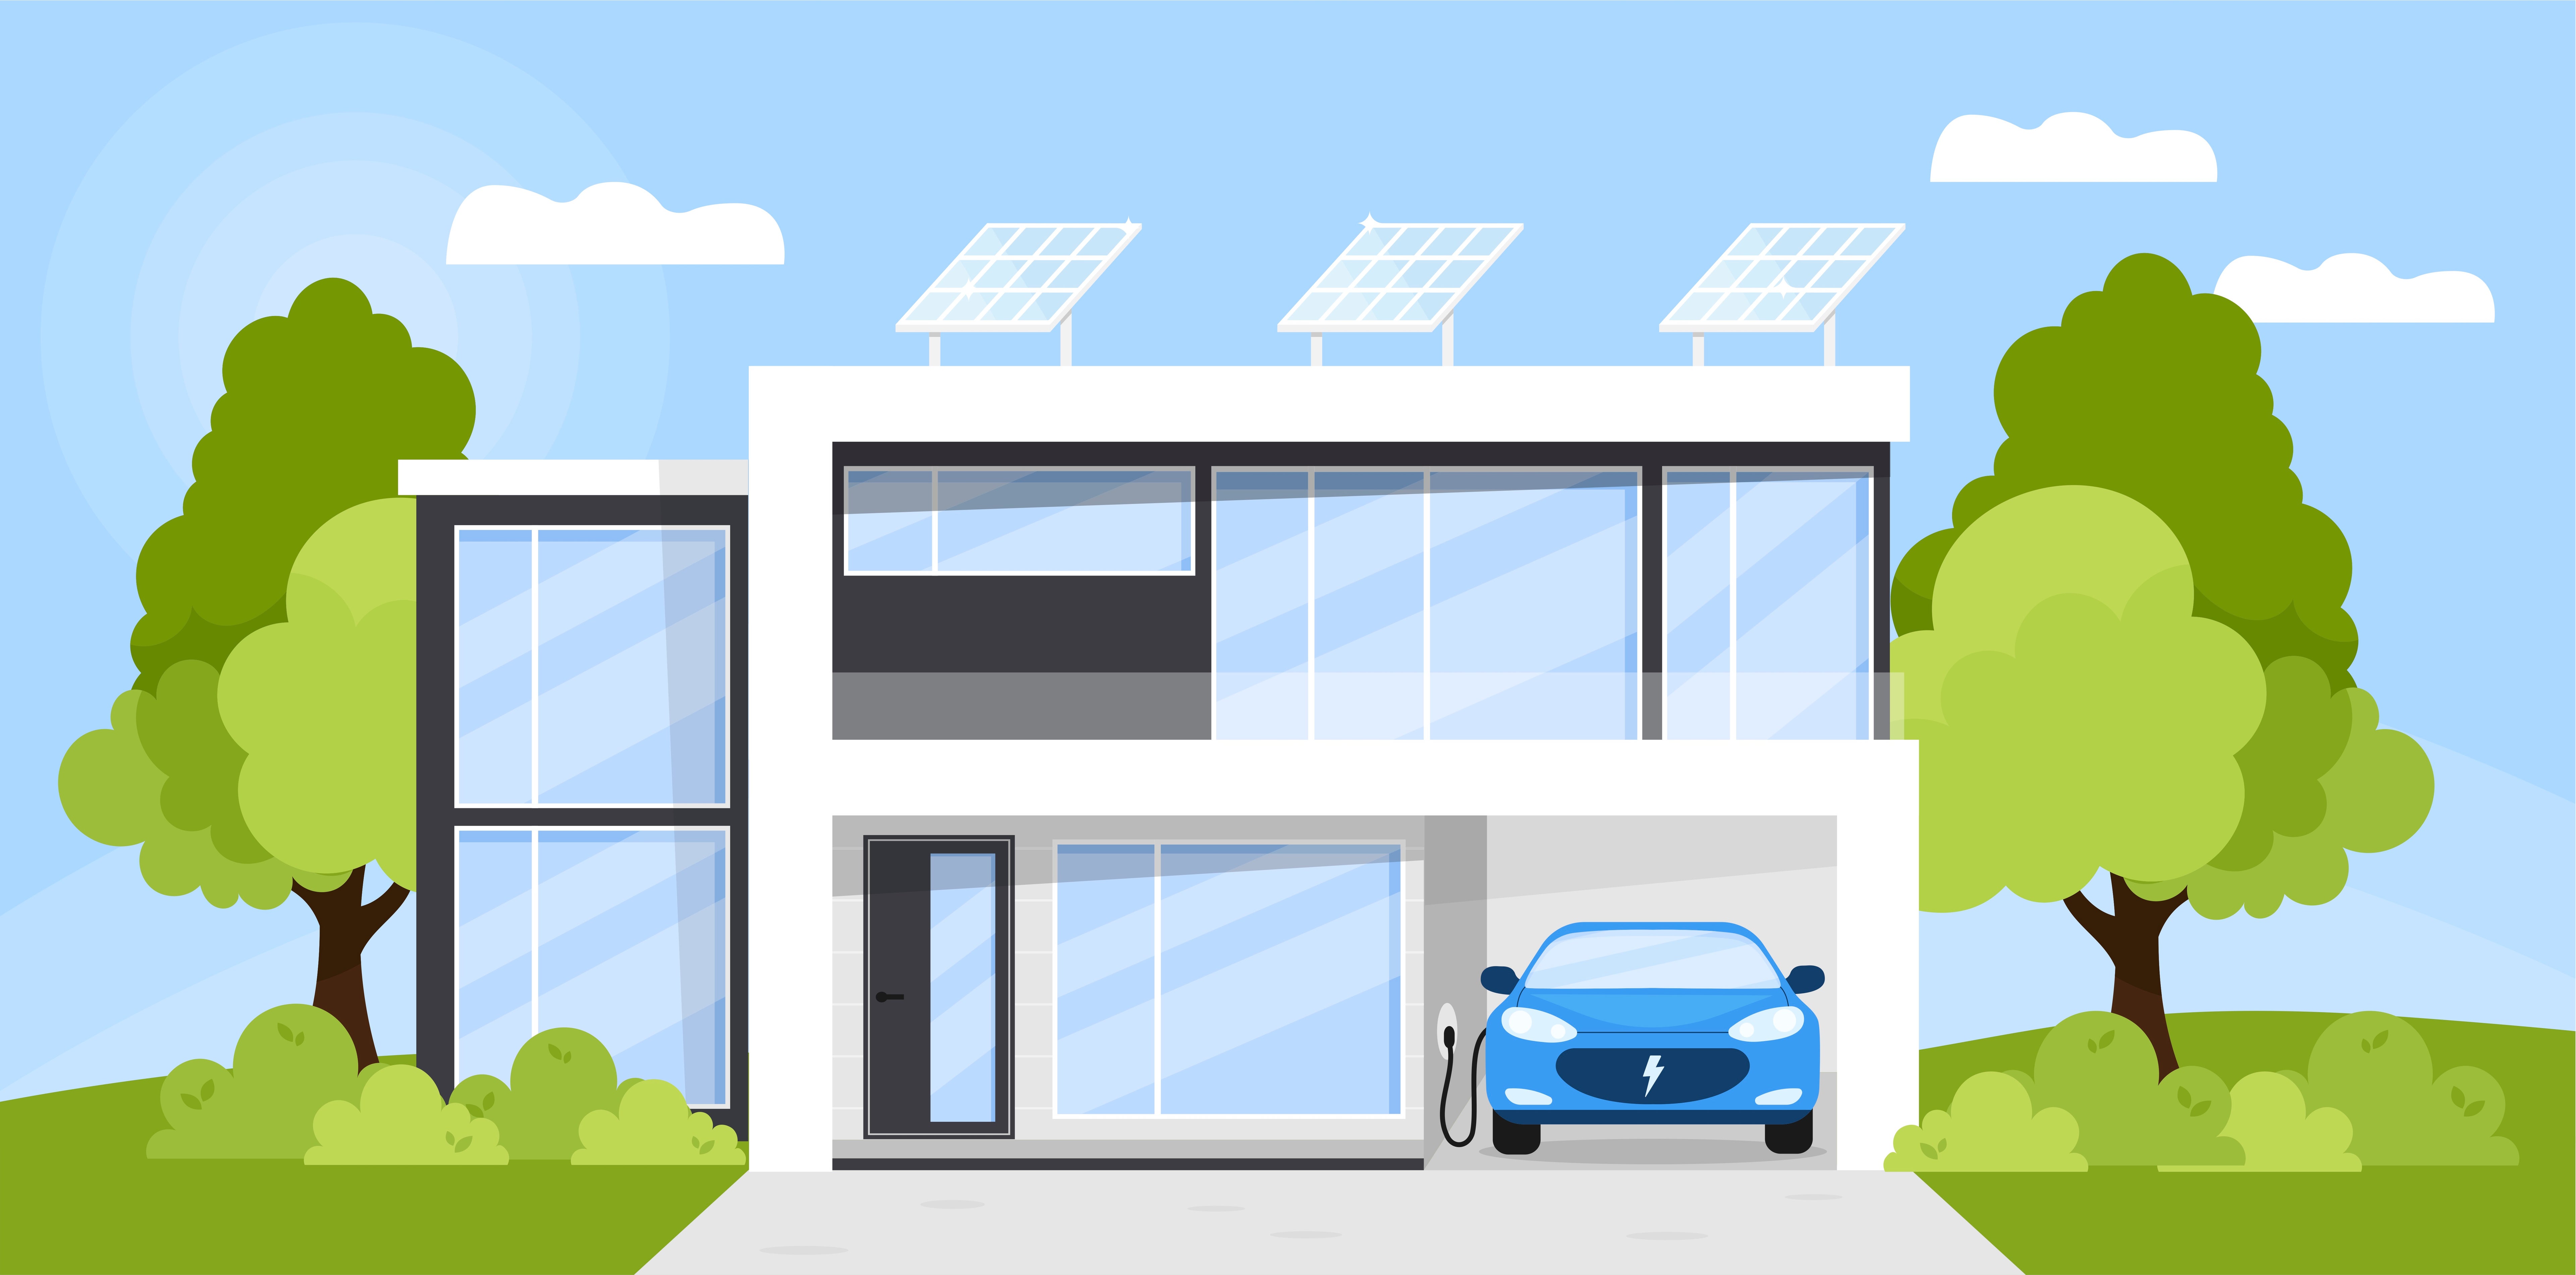 Could This Solar Company Get A Boost From Electric Vehicle Chargers?